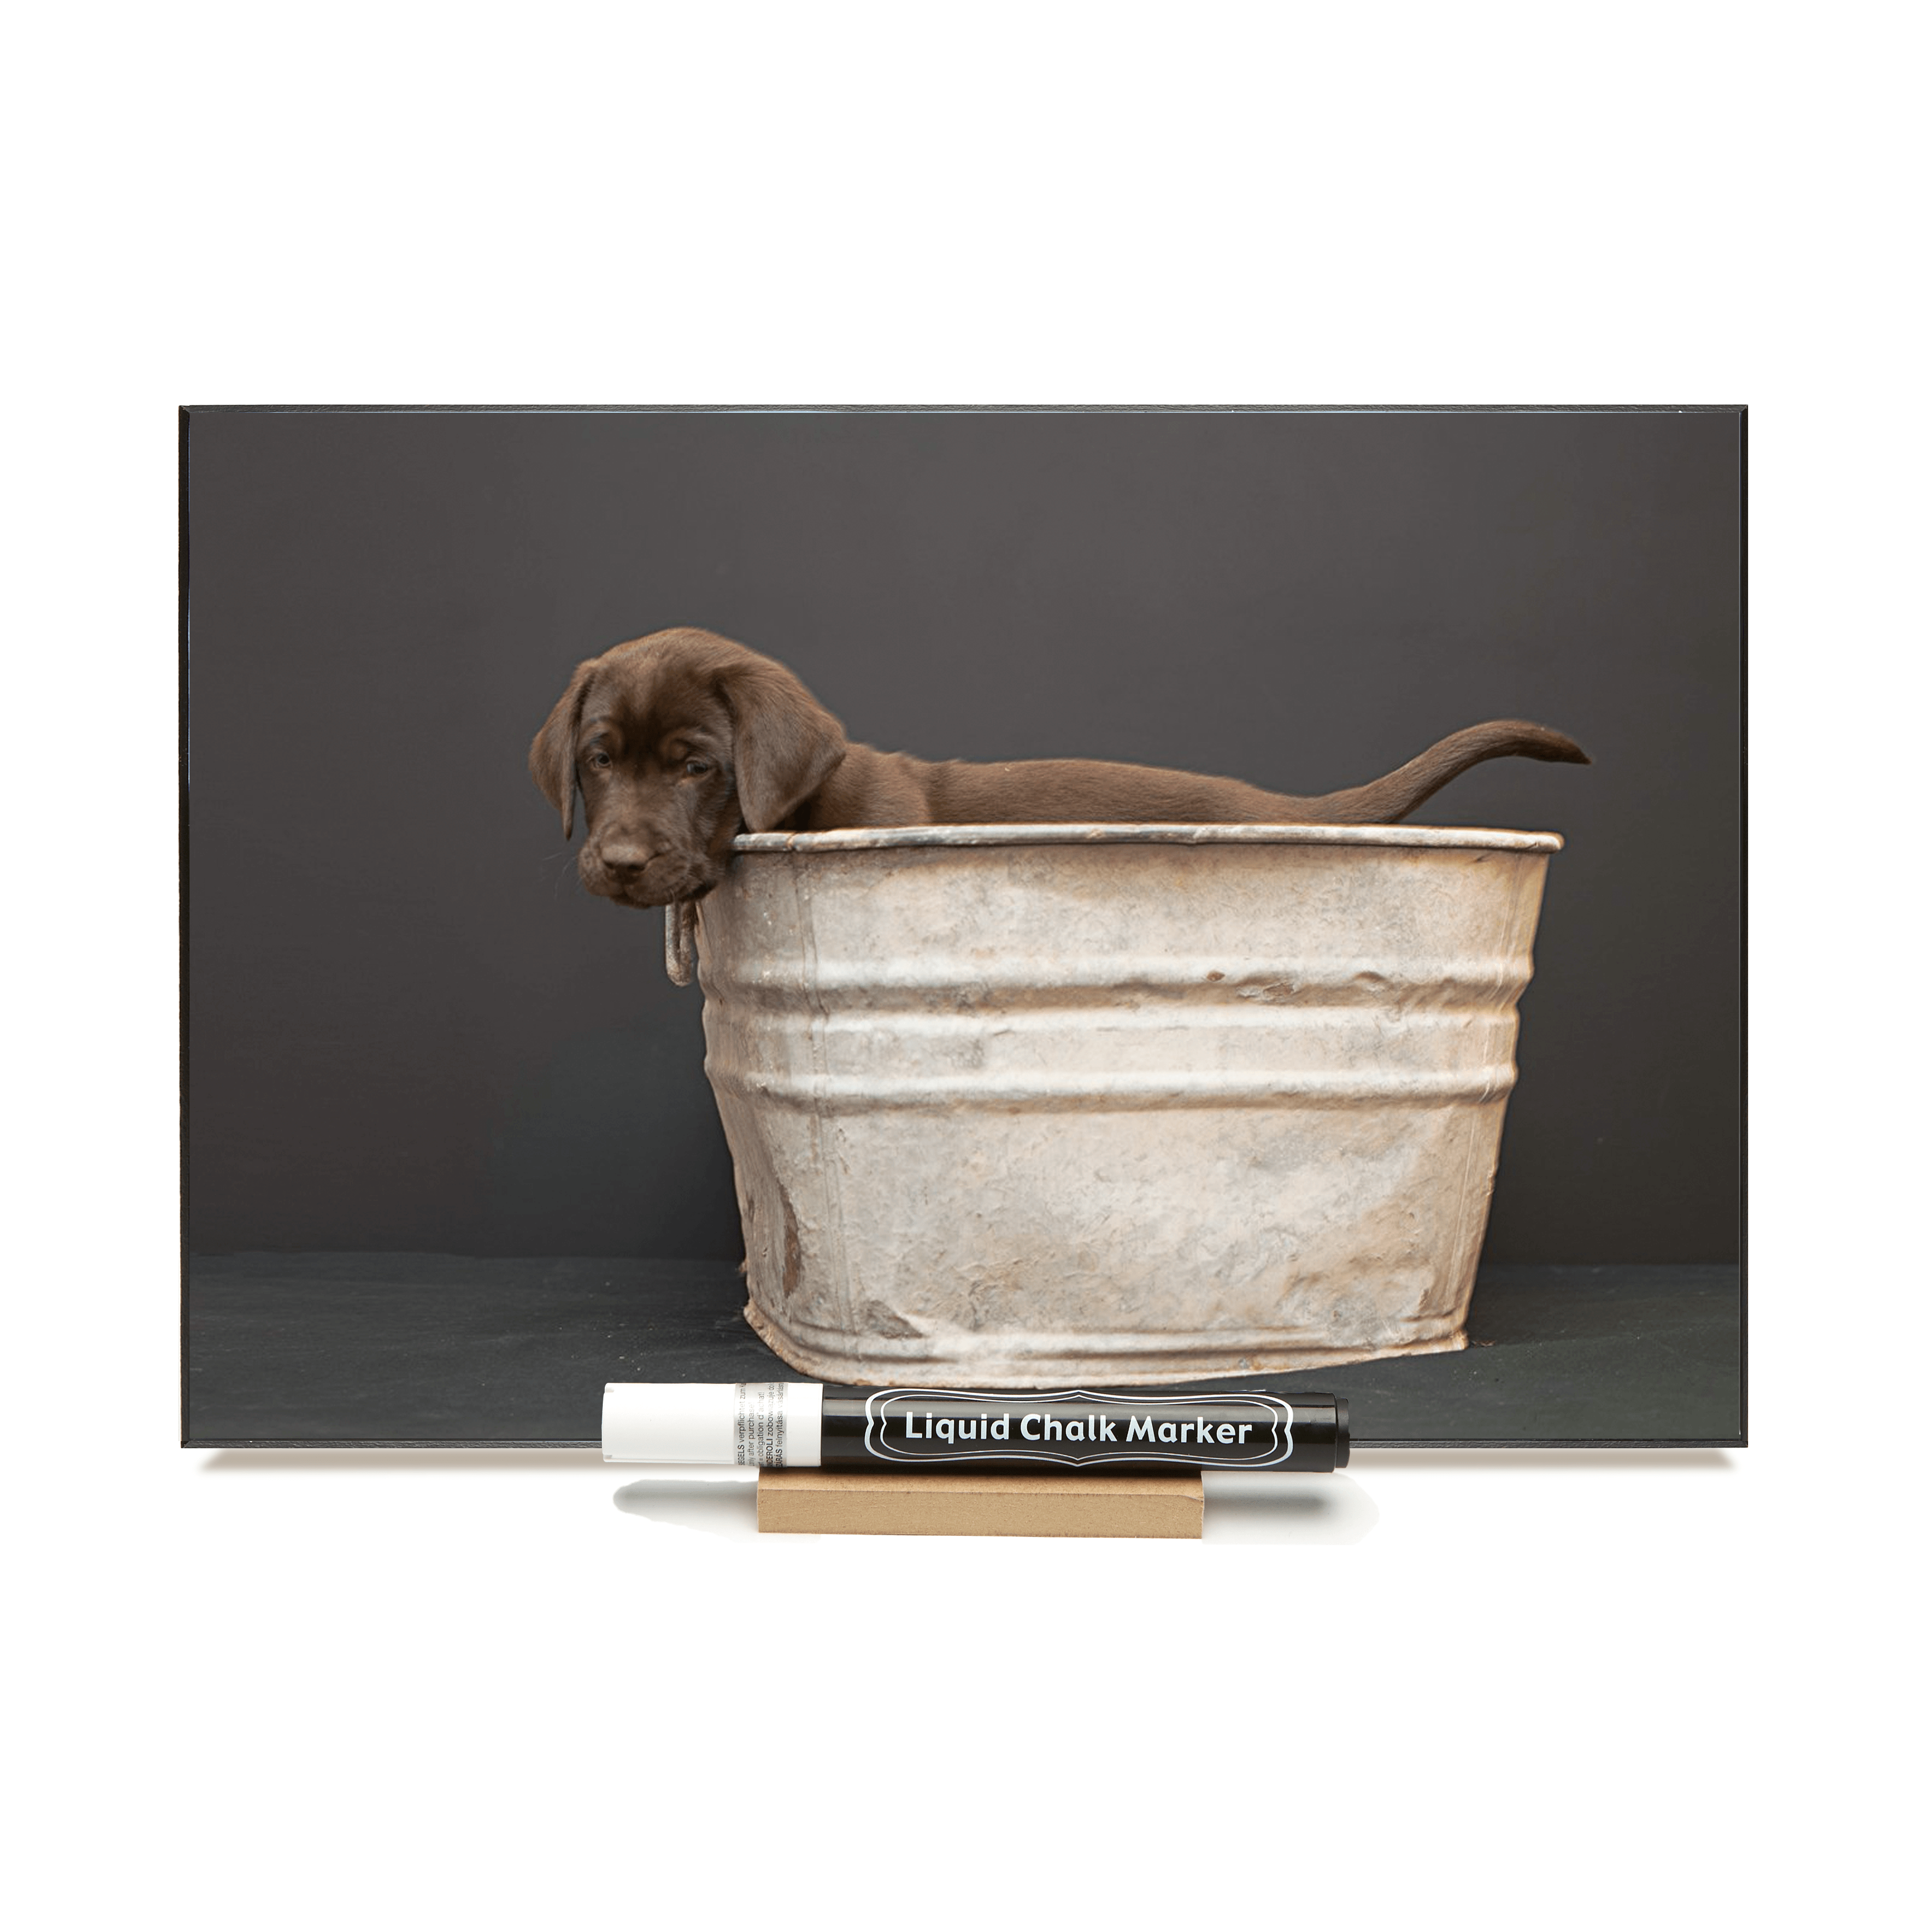 "Lab Pup In Tub"  PHOTO CHALKBOARD  Includes Chalkboard, Chalk Marker and Stand